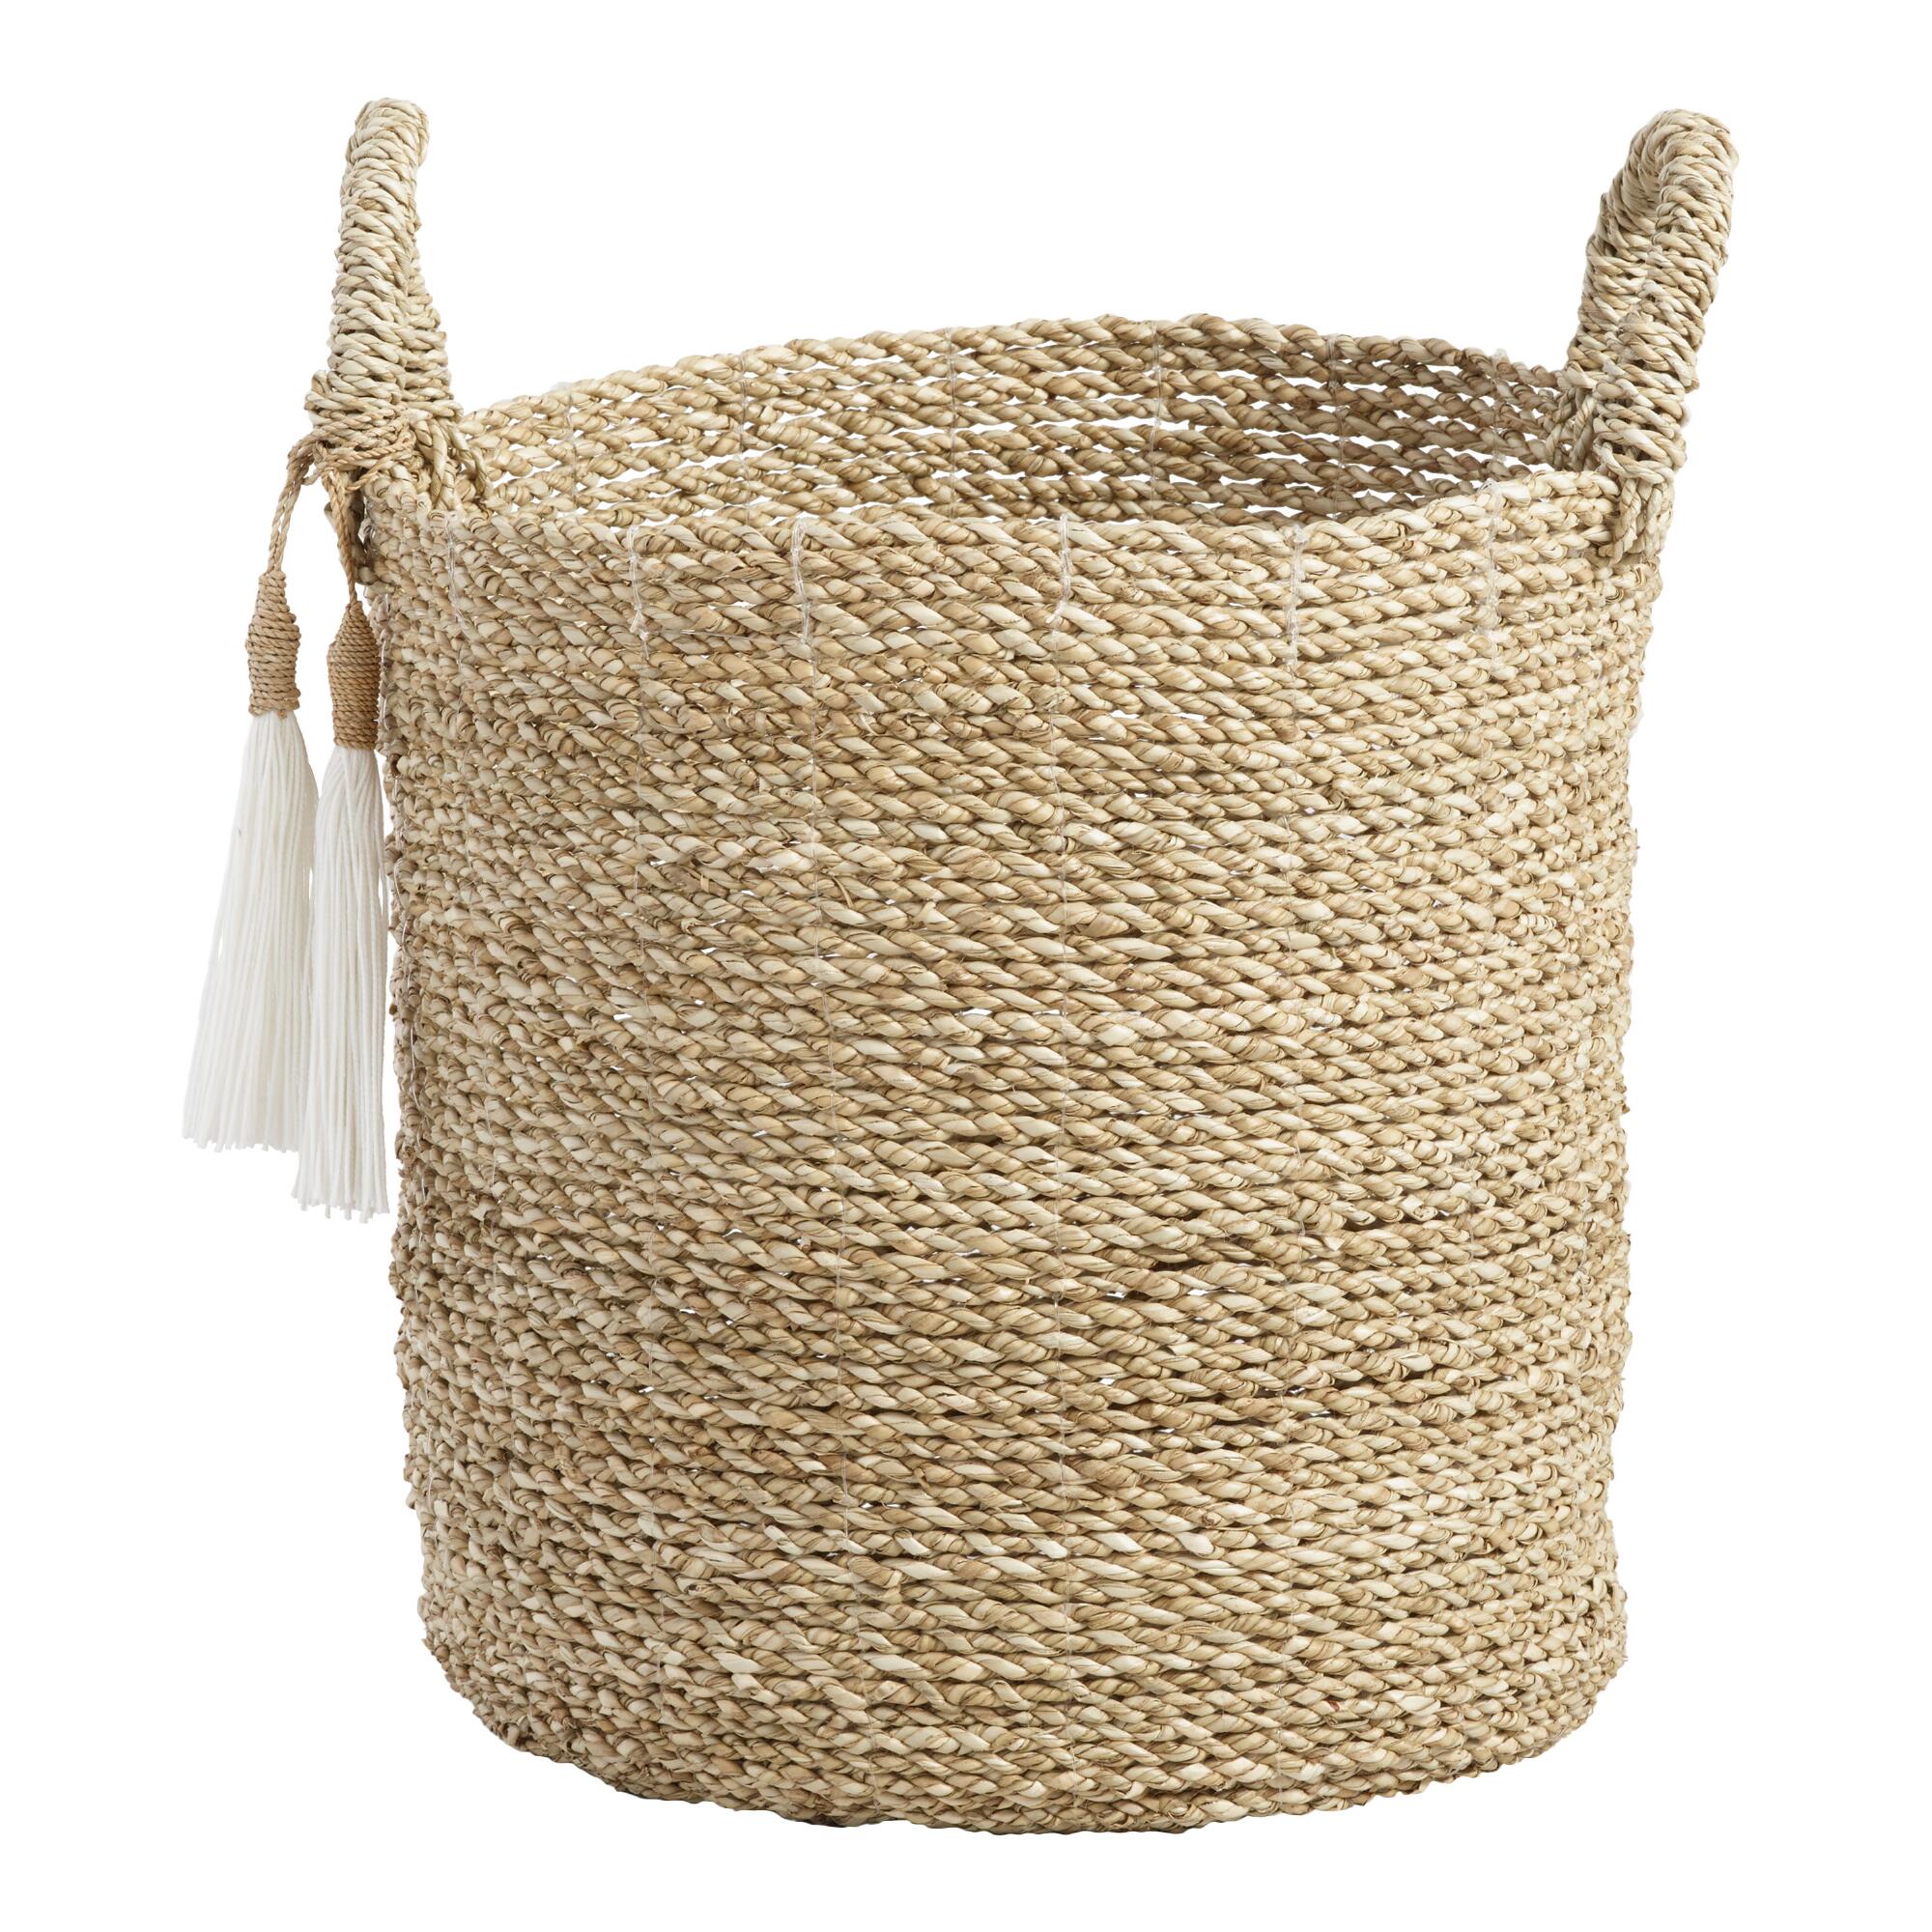 Small Seagrass Delilah Tote Basket with Tassels by World Market